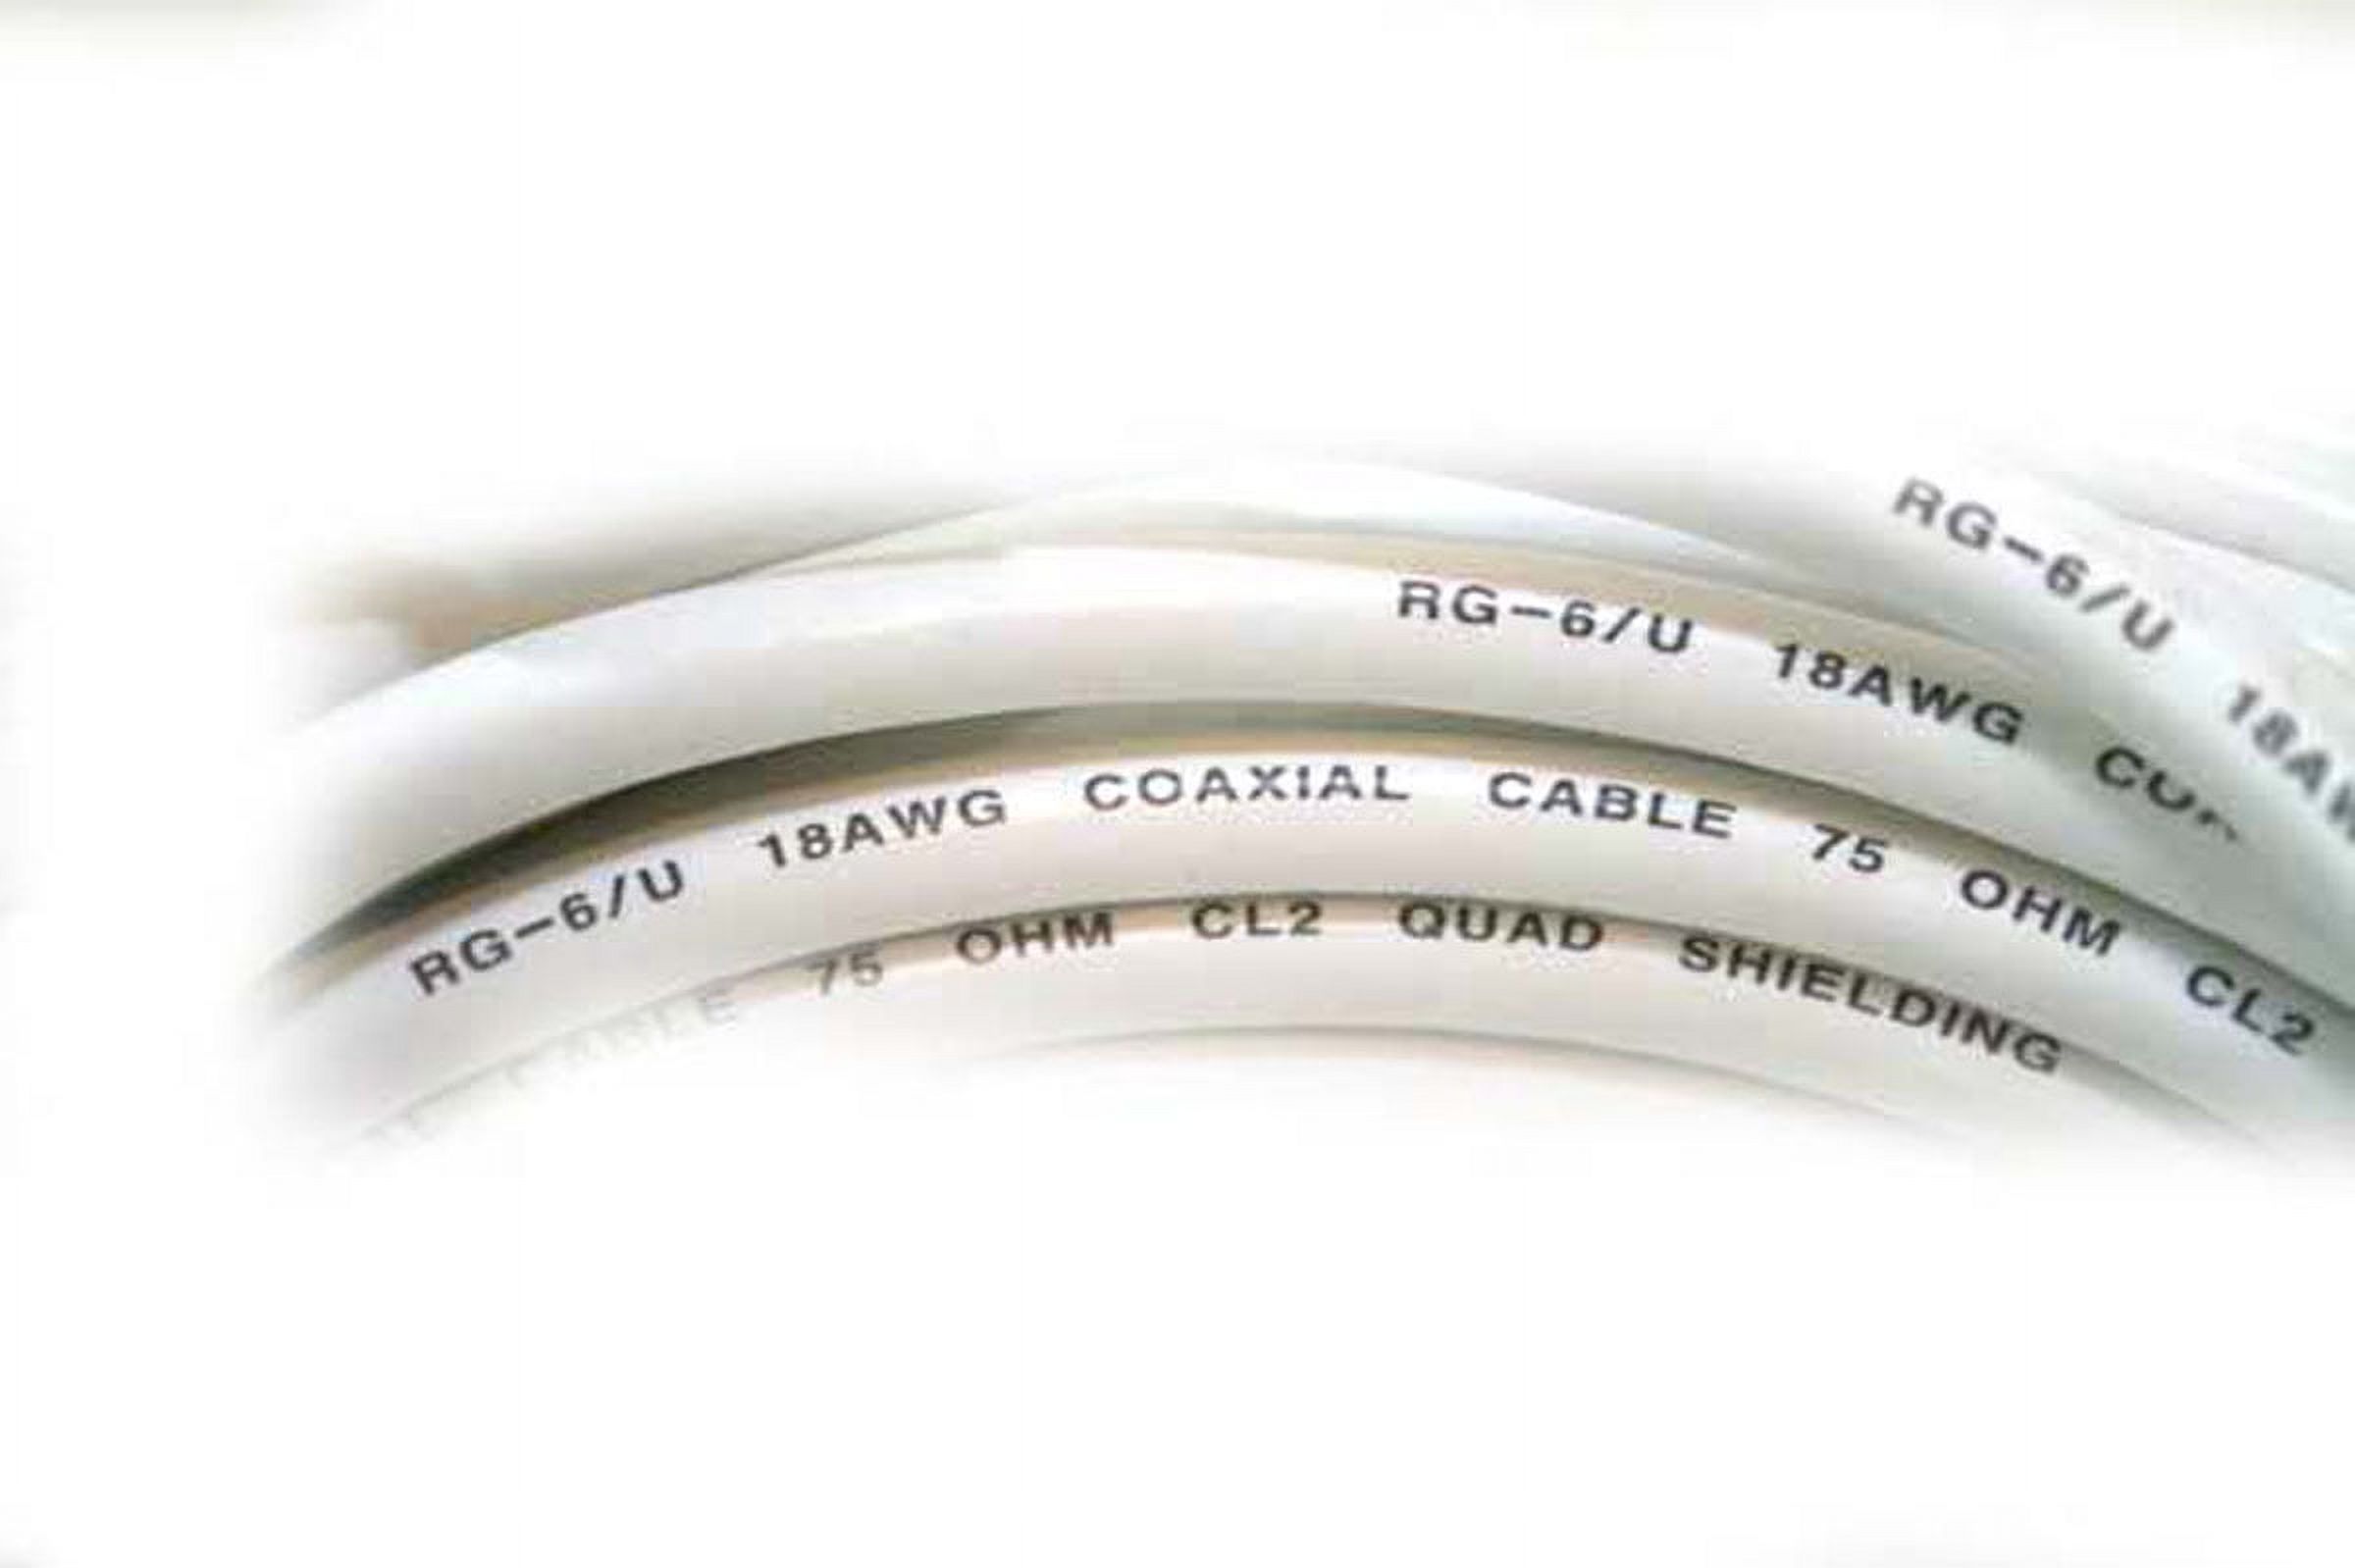 Monoprice 100' CL2 Quad Shielded RG6 F Type 18AWG Coaxial Cable White 104062 - image 3 of 3